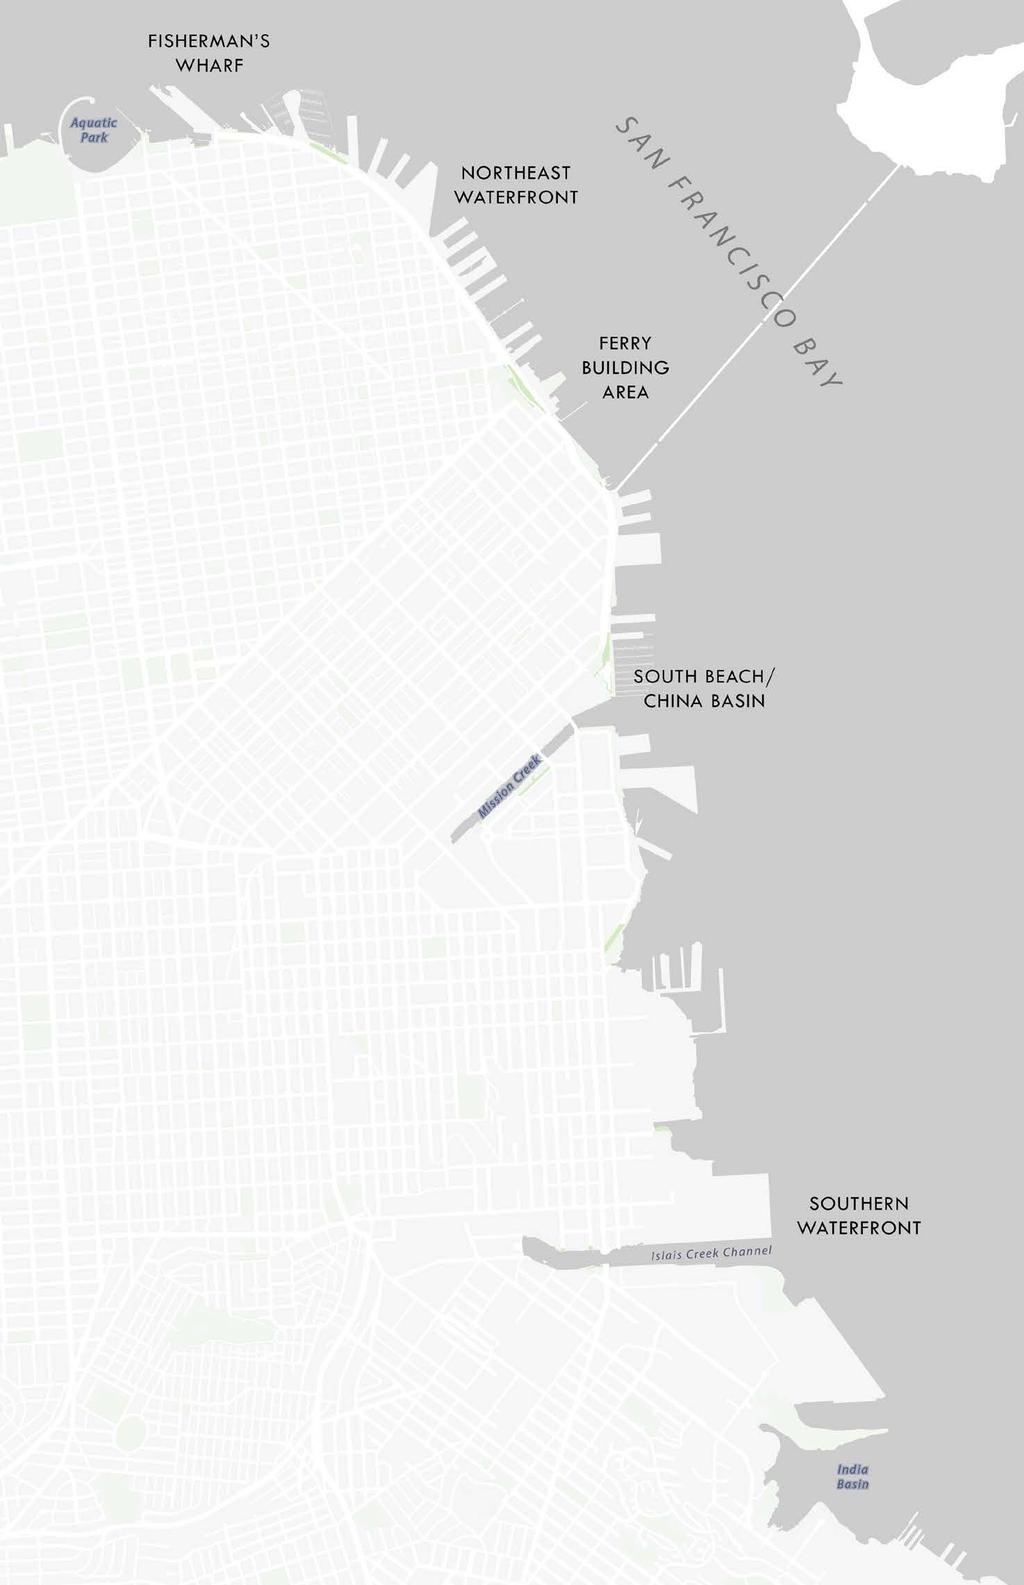 37 T 1 he Waterfront Plan includes the Waterfront Design & Access lement, which sets policies for developing the Port s open space system, protection of view corridors, and preserving the Port s